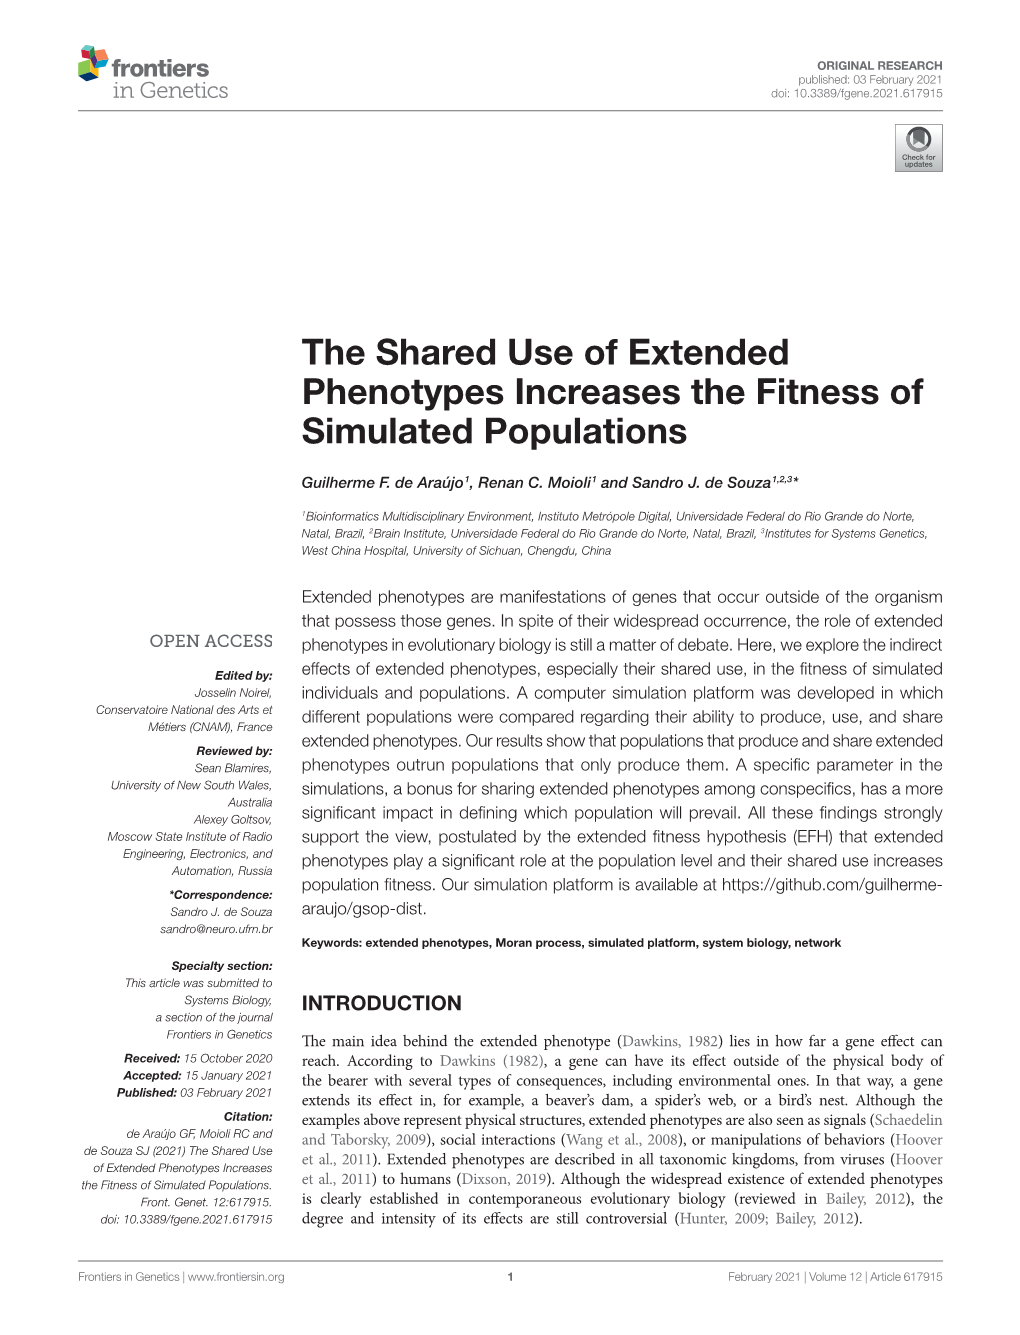 The Shared Use of Extended Phenotypes Increases the Fitness of Simulated Populations